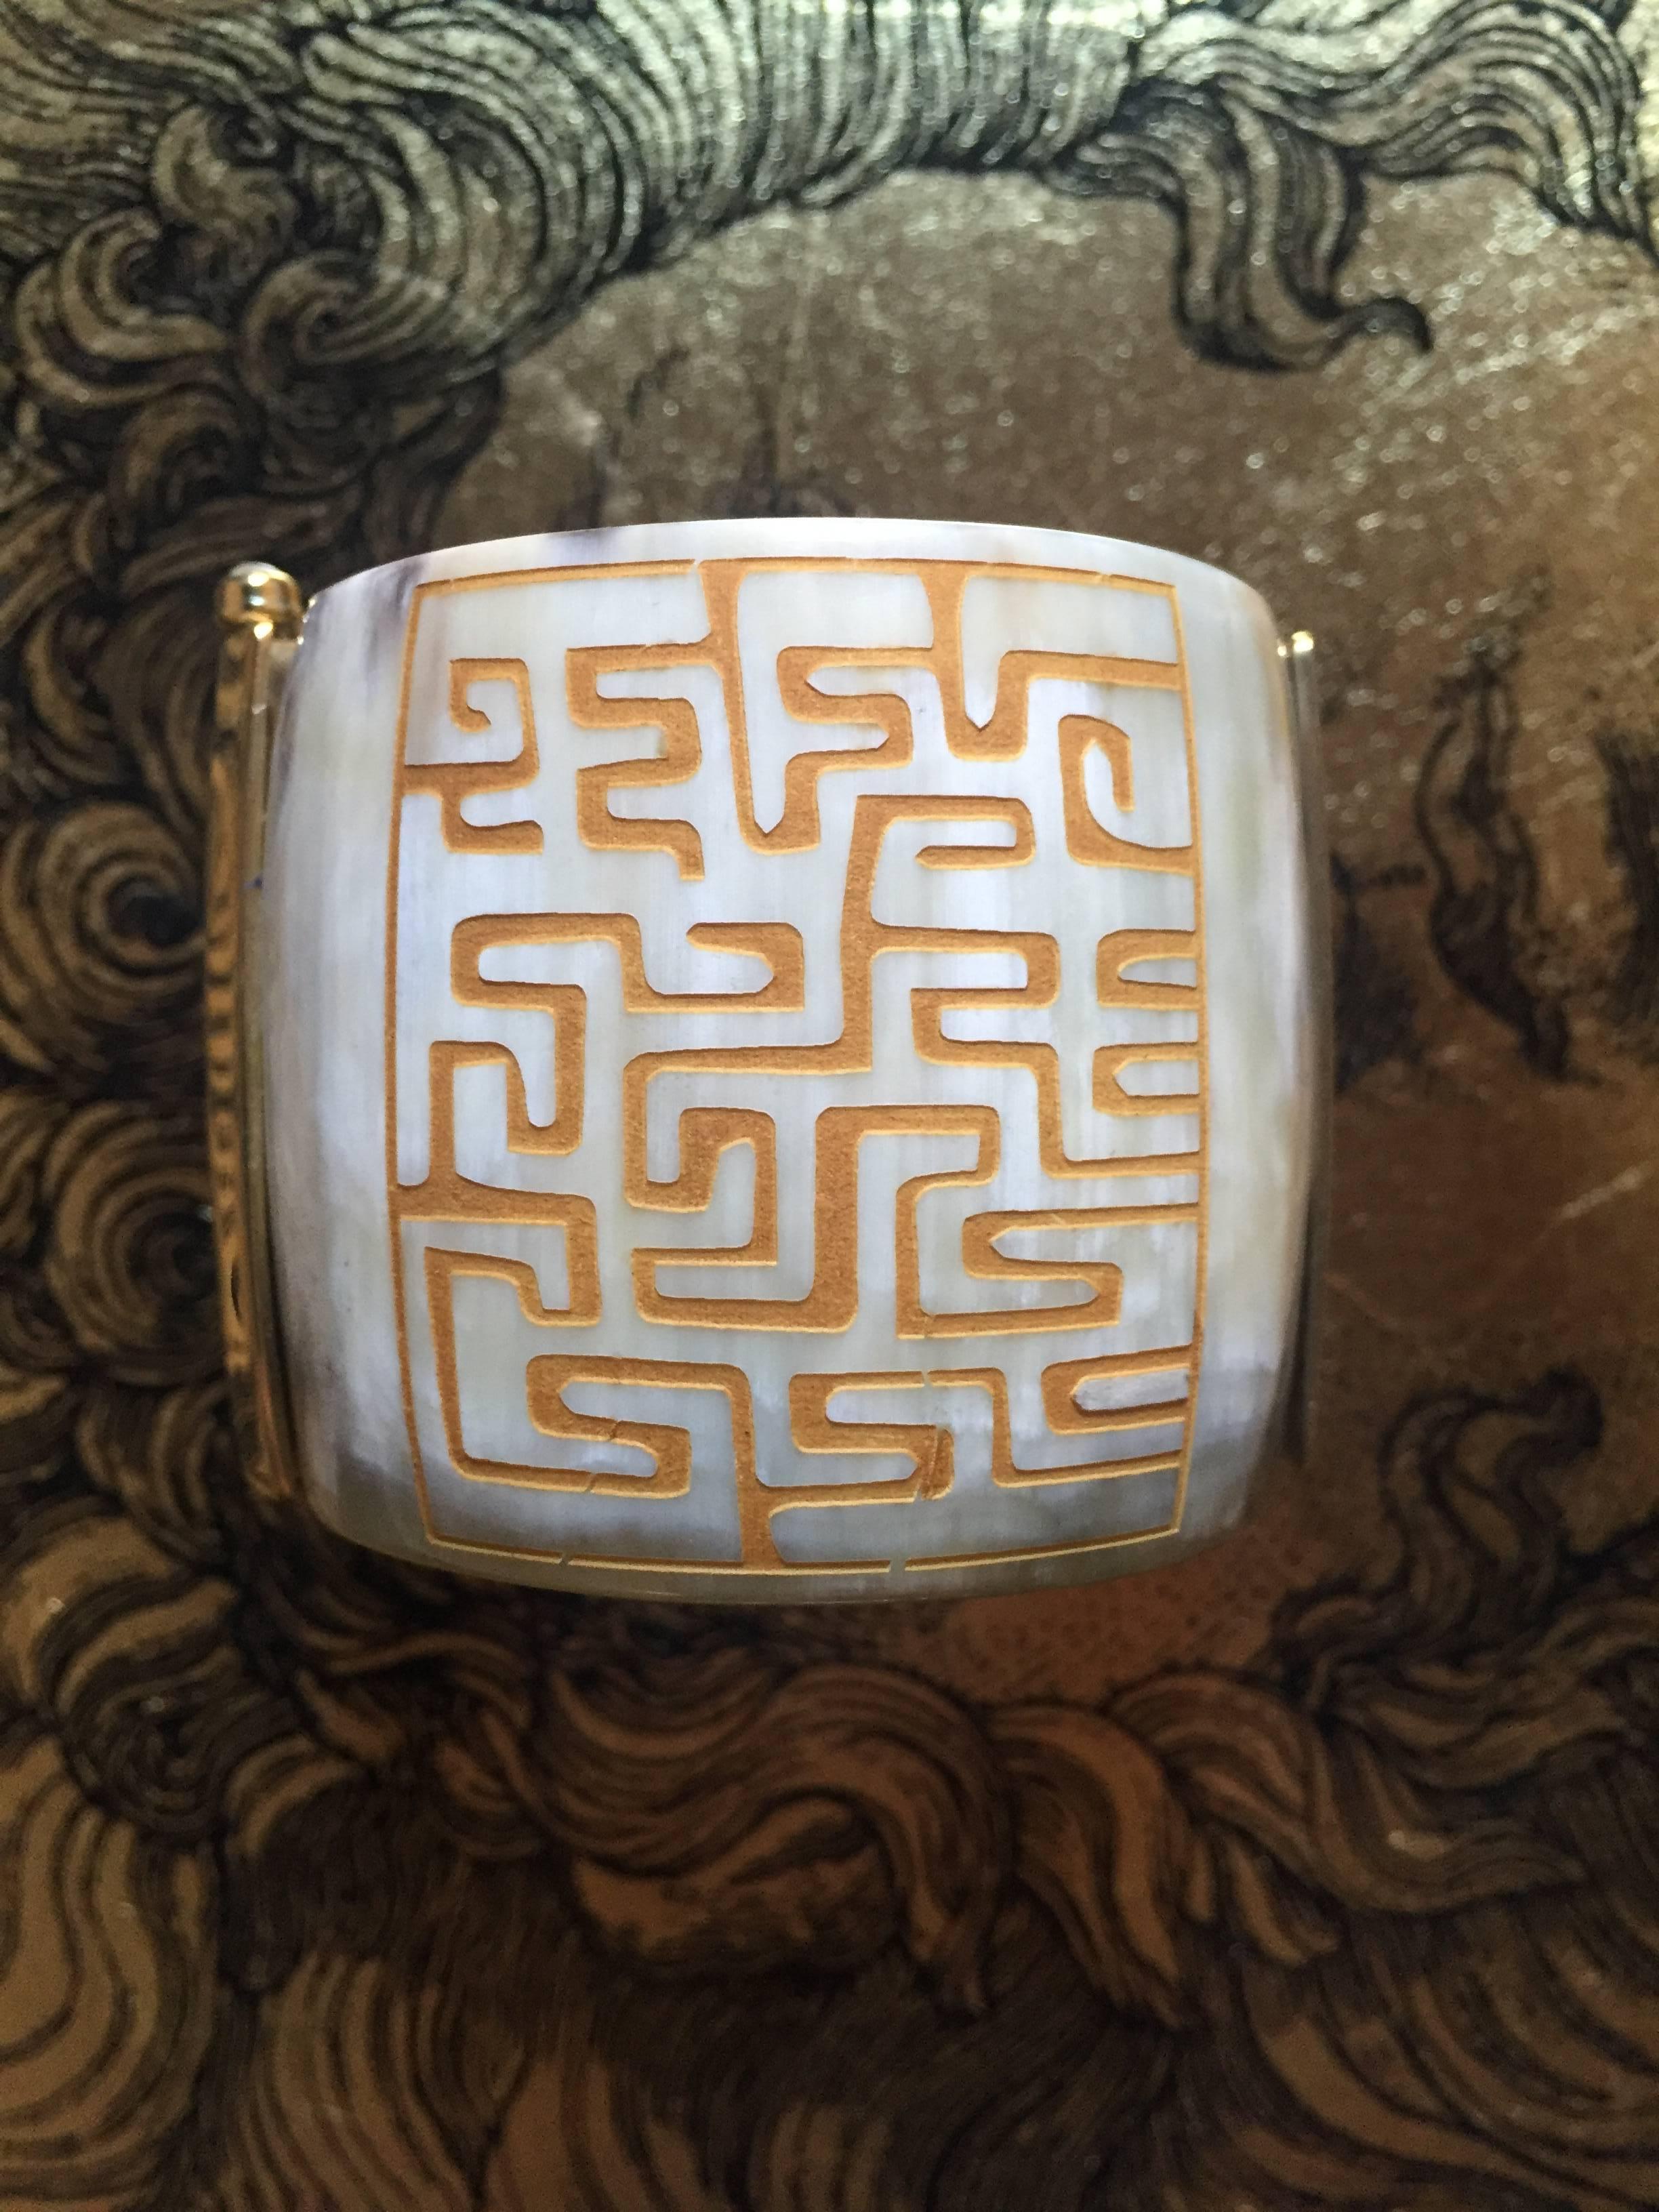 This unique cuff is crafted from African cow horn and engraved with a geometric motif on one side; the other side is not engraved;  showing the natural marbled graining of cow horn. The intricate pin-clasp is set with a  fire-opal sourced from